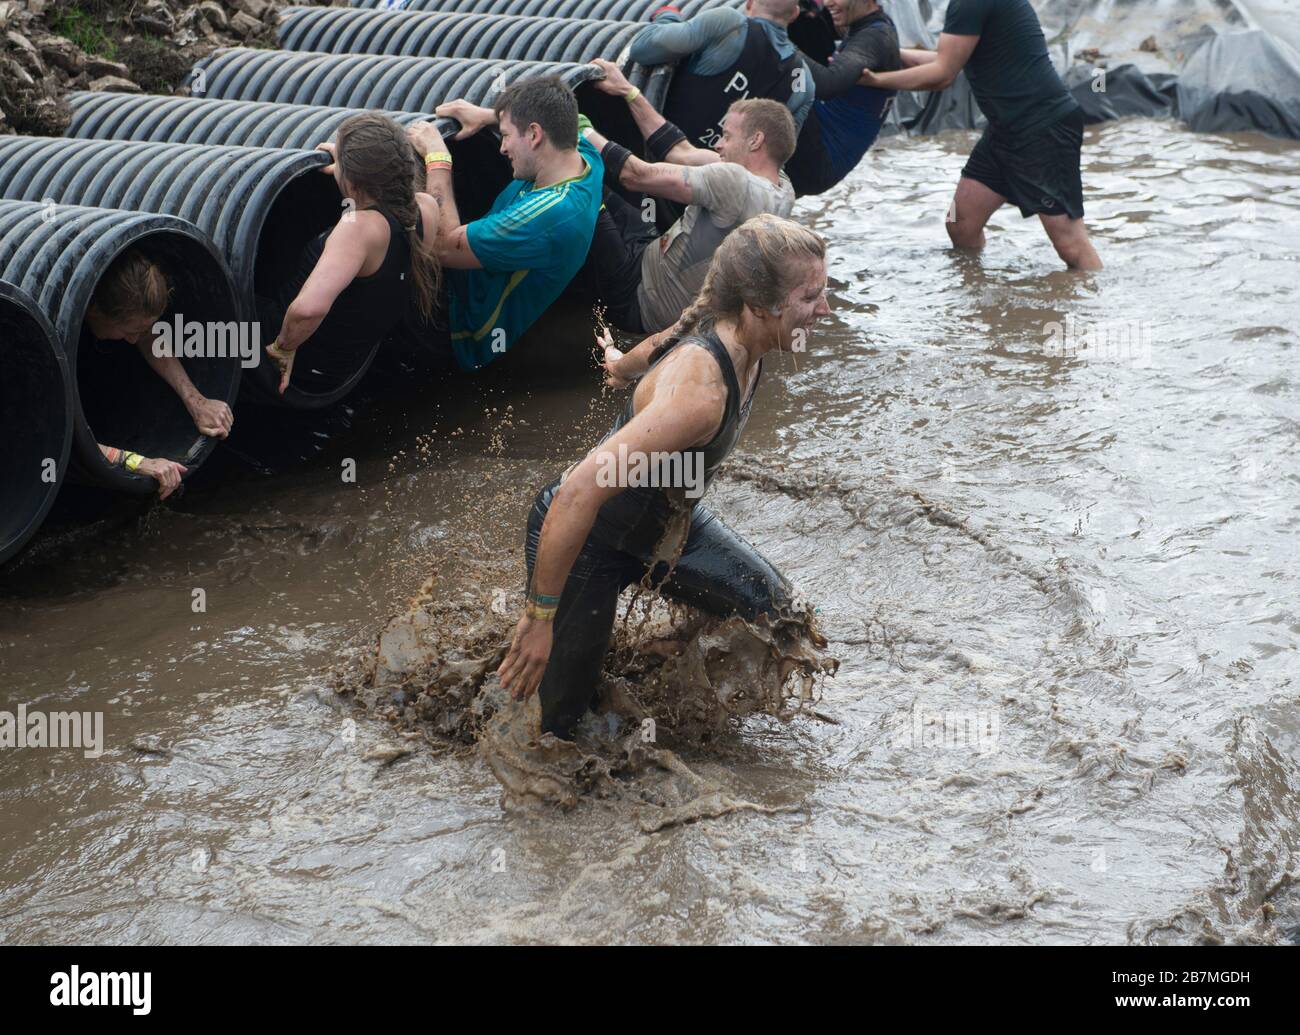 A soaking wet participant exits the water at the Shawshanked obstacle at a Tough Mudder event Stock Photo